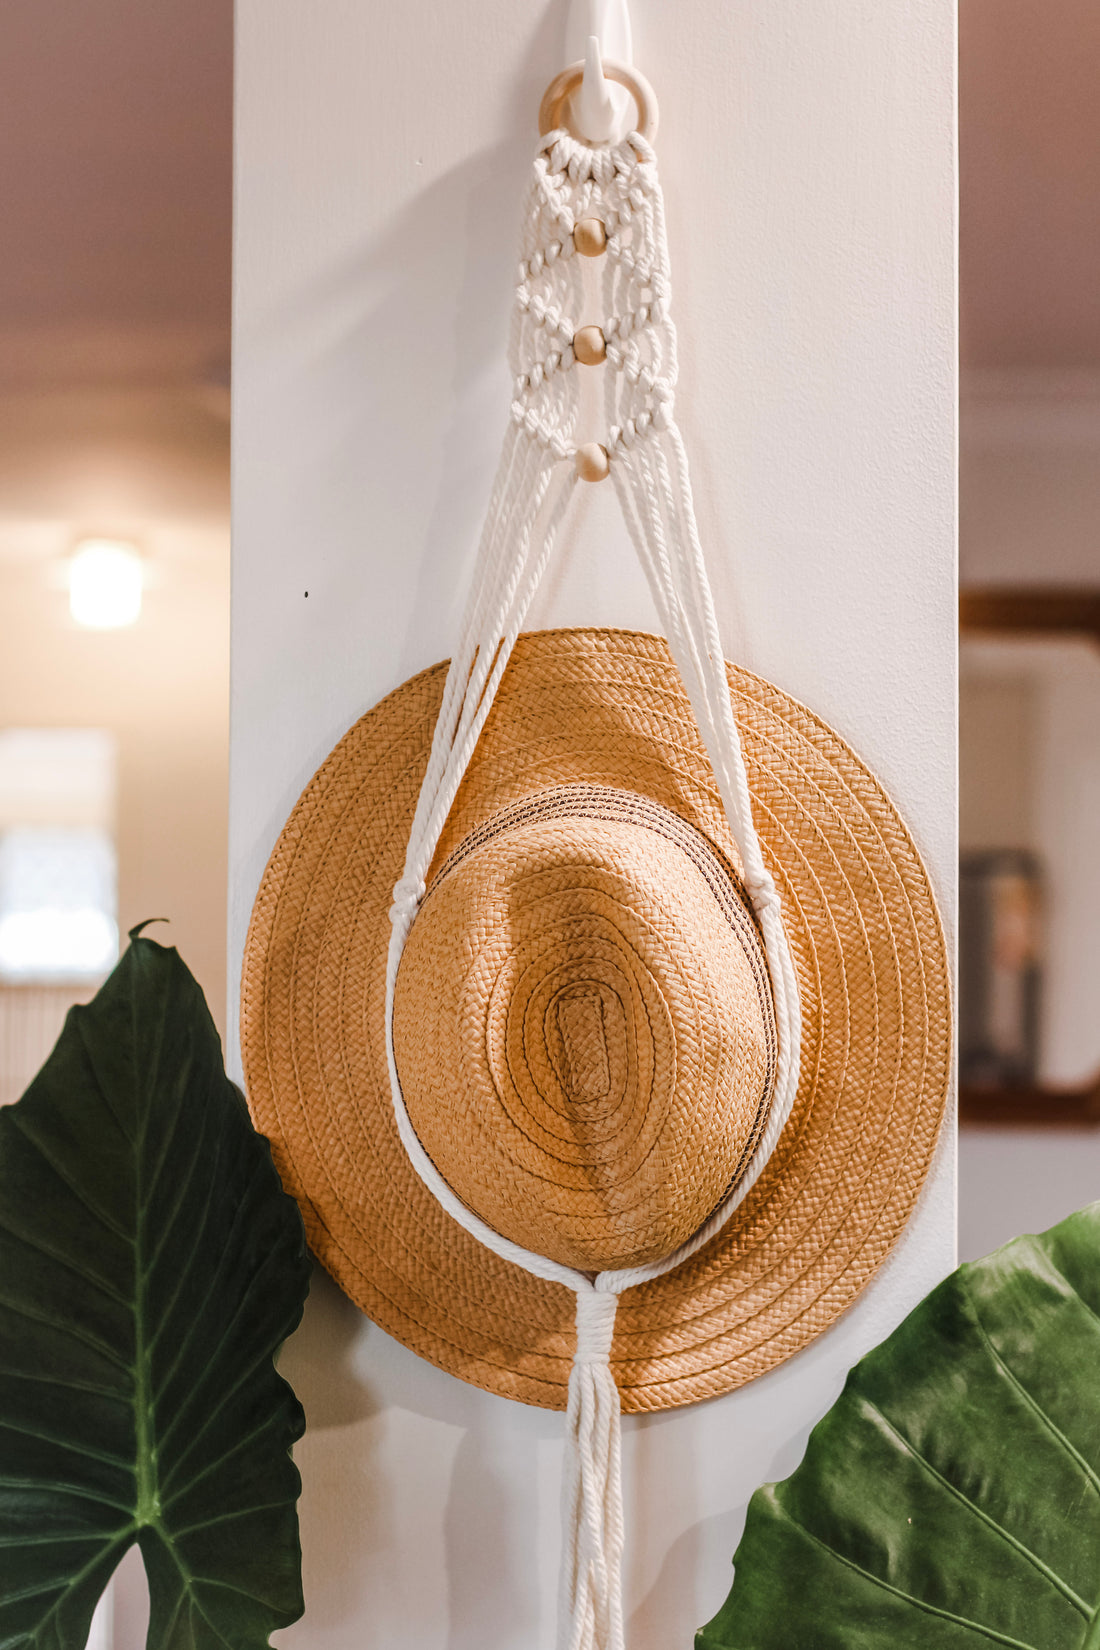 Top 10 Macrame Decor Products to Transform Your Home